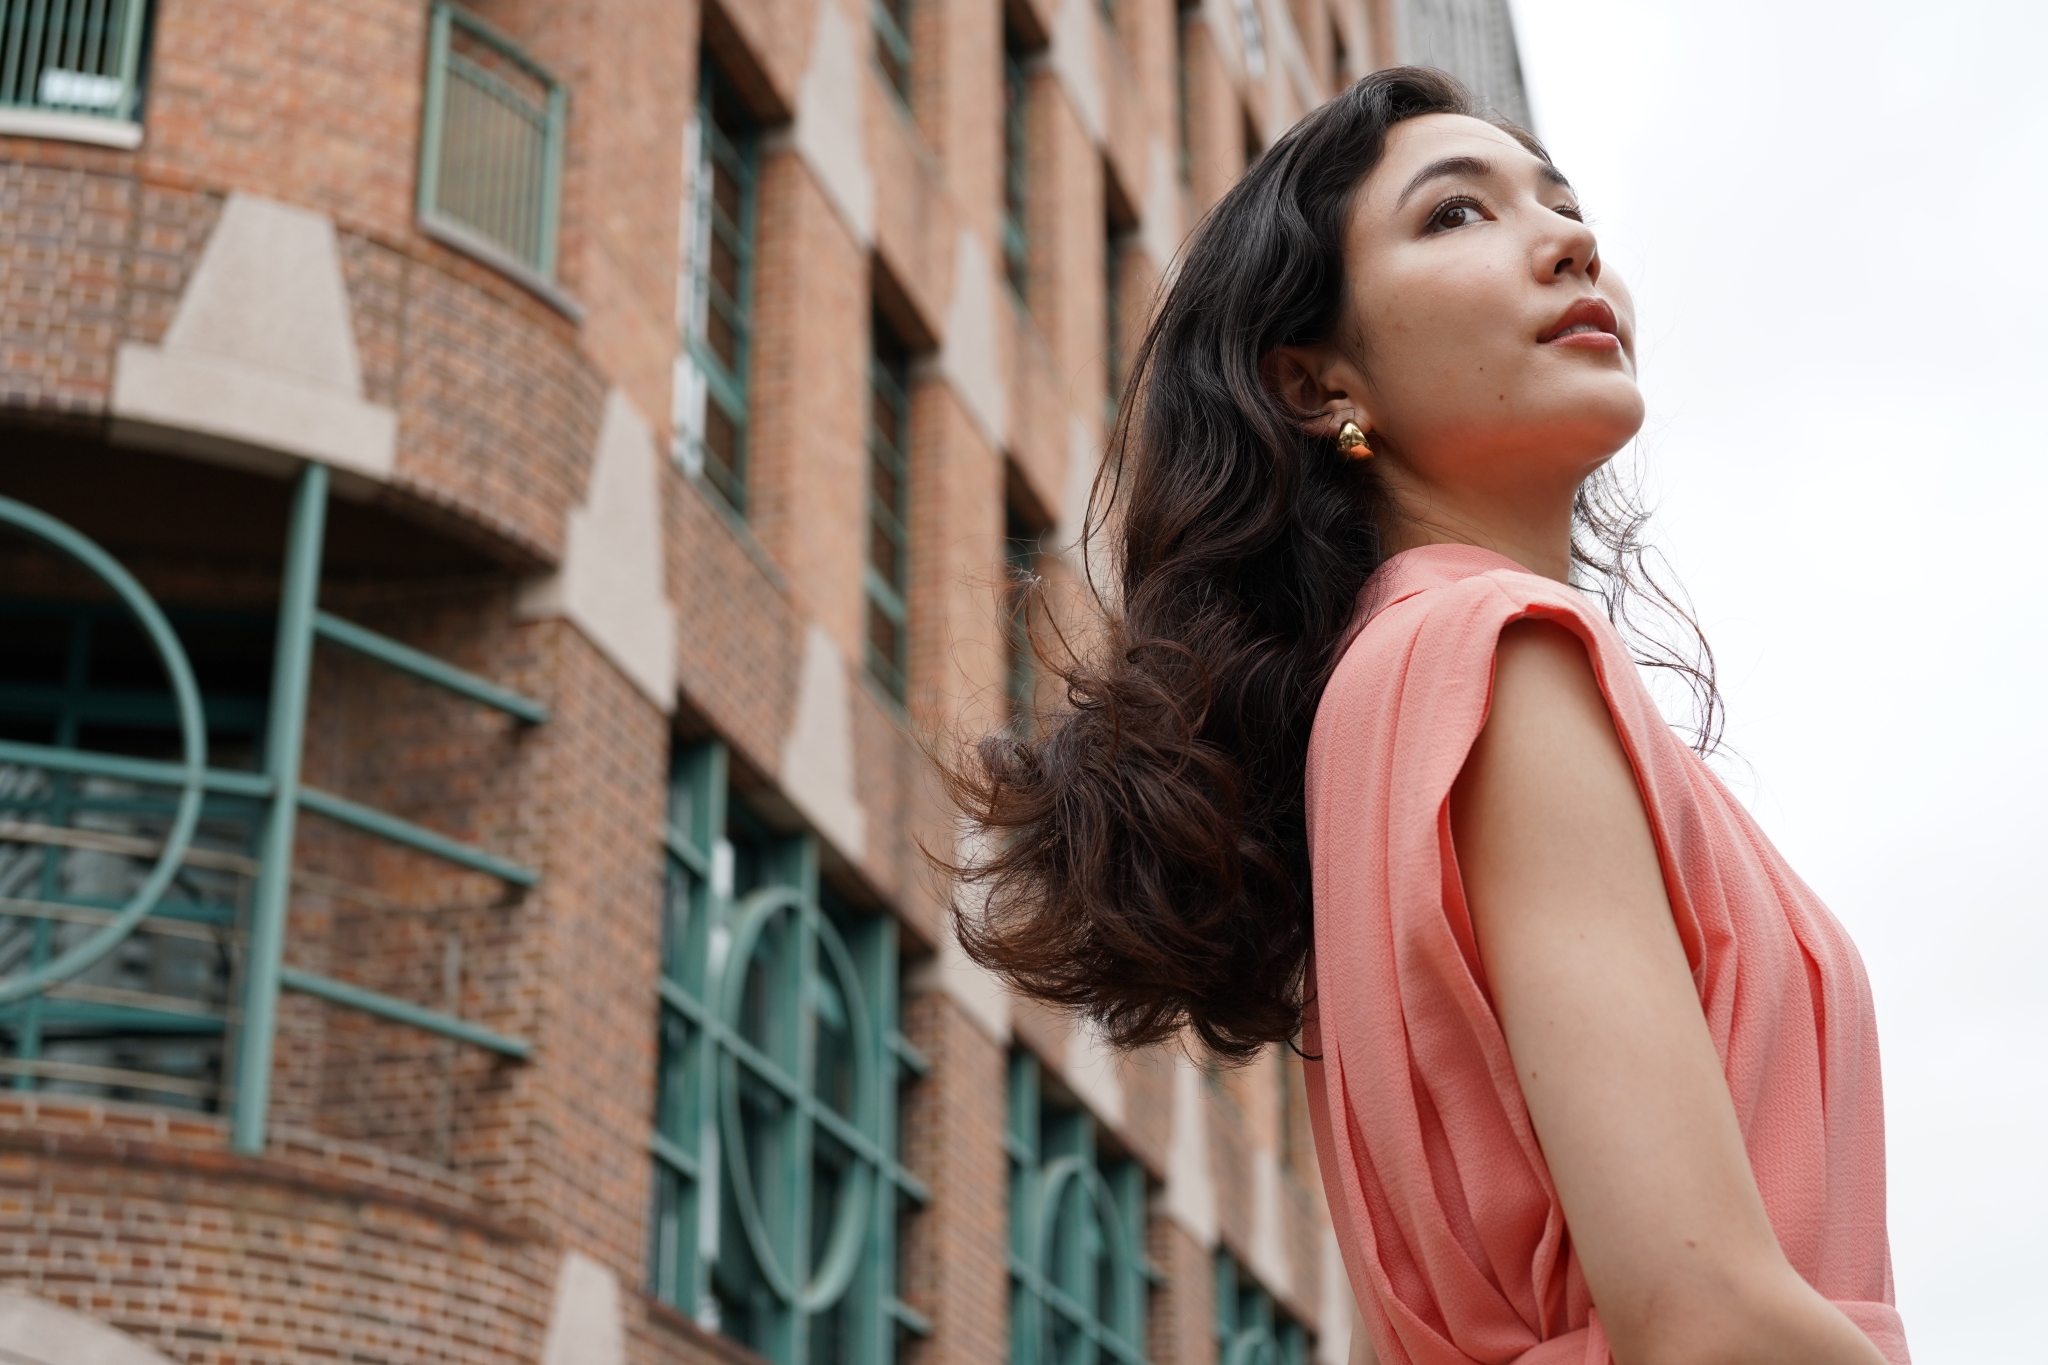 Female model stood to the right of the frame with a brick building in the background